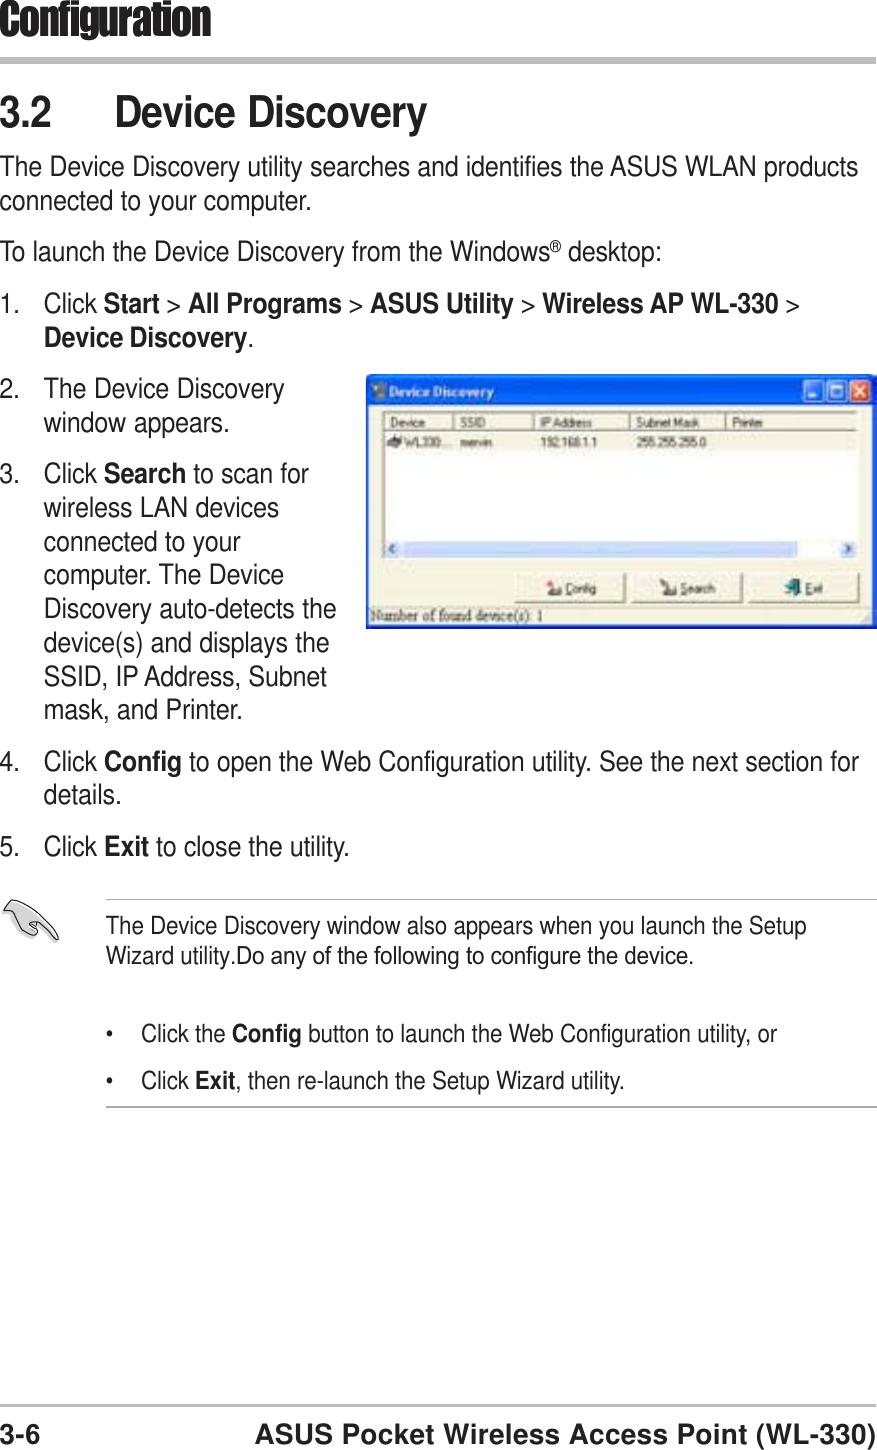 3-6ASUS Pocket Wireless Access Point (WL-330)Configuration3.2 Device DiscoveryThe Device Discovery utility searches and identifies the ASUS WLAN productsconnected to your computer.To launch the Device Discovery from the Windows® desktop:1. Click Start &gt;All Programs &gt;ASUS Utility &gt;Wireless AP WL-330 &gt;Device Discovery.2. The Device Discoverywindow appears.3. Click Search to scan forwireless LAN devicesconnected to yourcomputer. The DeviceDiscovery auto-detects thedevice(s) and displays theSSID, IP Address, Subnetmask, and Printer.4. Click Config to open the Web Configuration utility. See the next section fordetails.5. Click Exit to close the utility.The Device Discovery window also appears when you launch the SetupWizard utility.Do any of the following to configure the device.• Click the Config button to launch the Web Configuration utility, or• Click Exit, then re-launch the Setup Wizard utility.